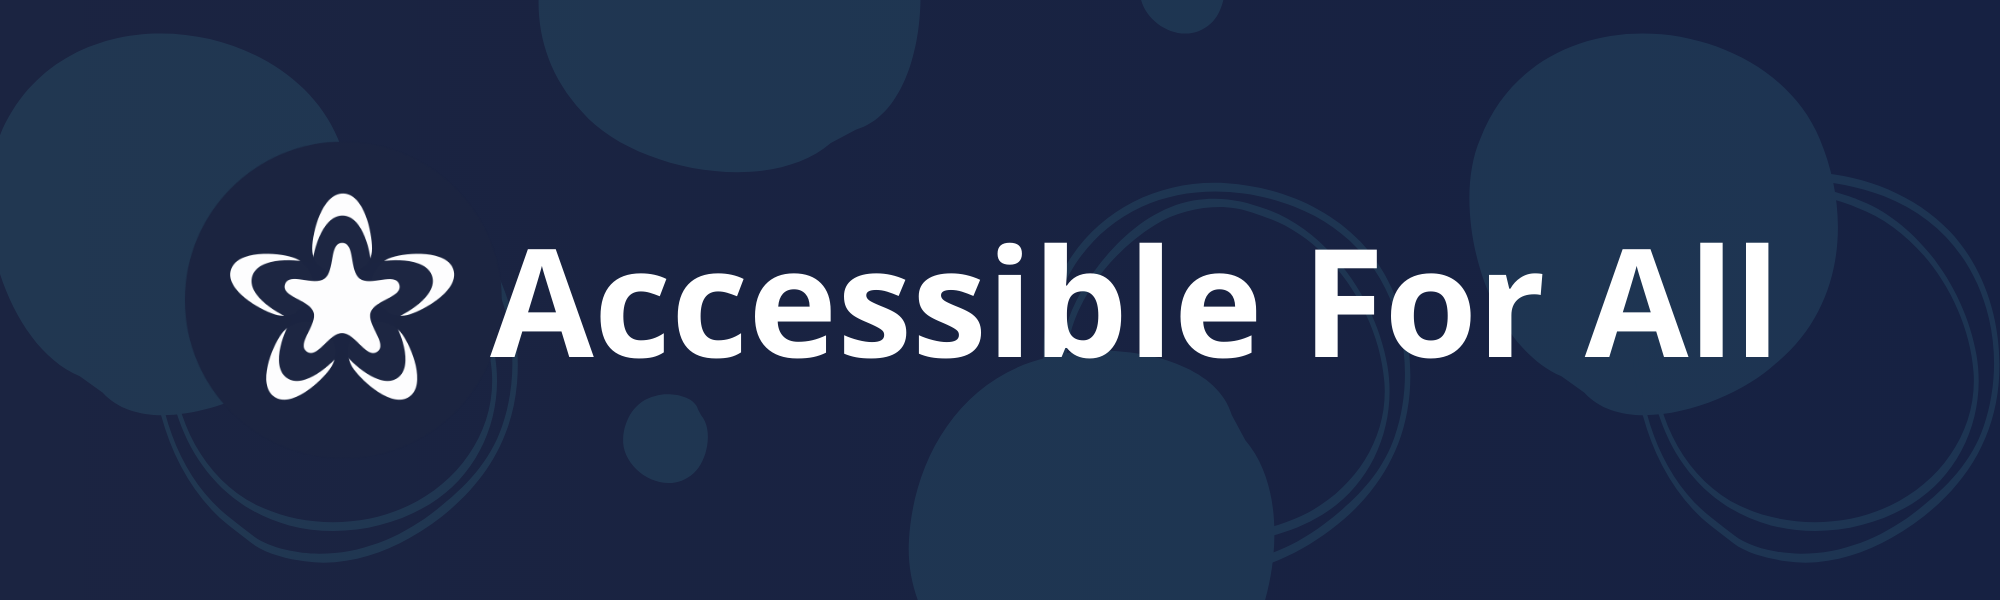 Accessible for all logo with a dark blue background with circular shapes